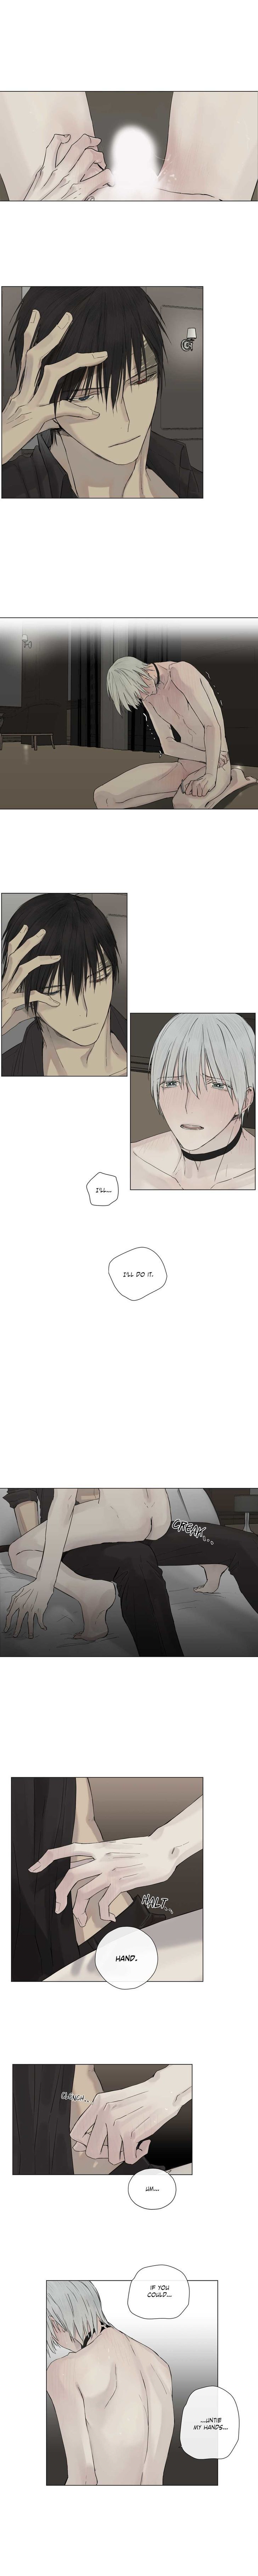 Royal Servant - Chapter 8 Page 7